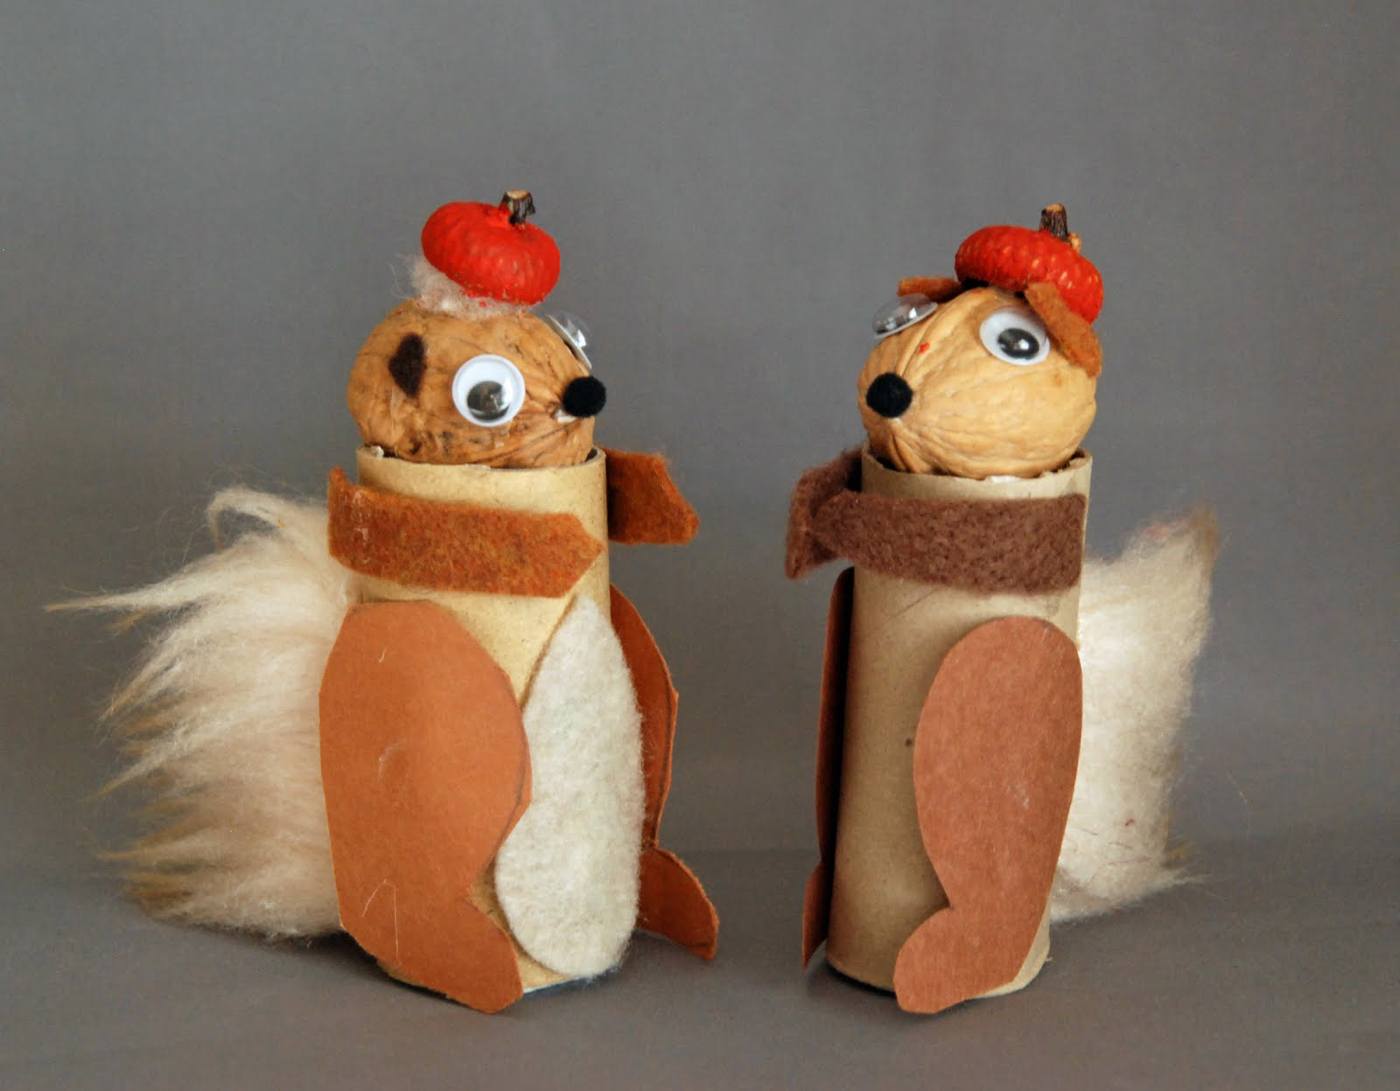 Squirrels made of knocked paper rolls and nuts and felt make fun decoration for home cooking with the children